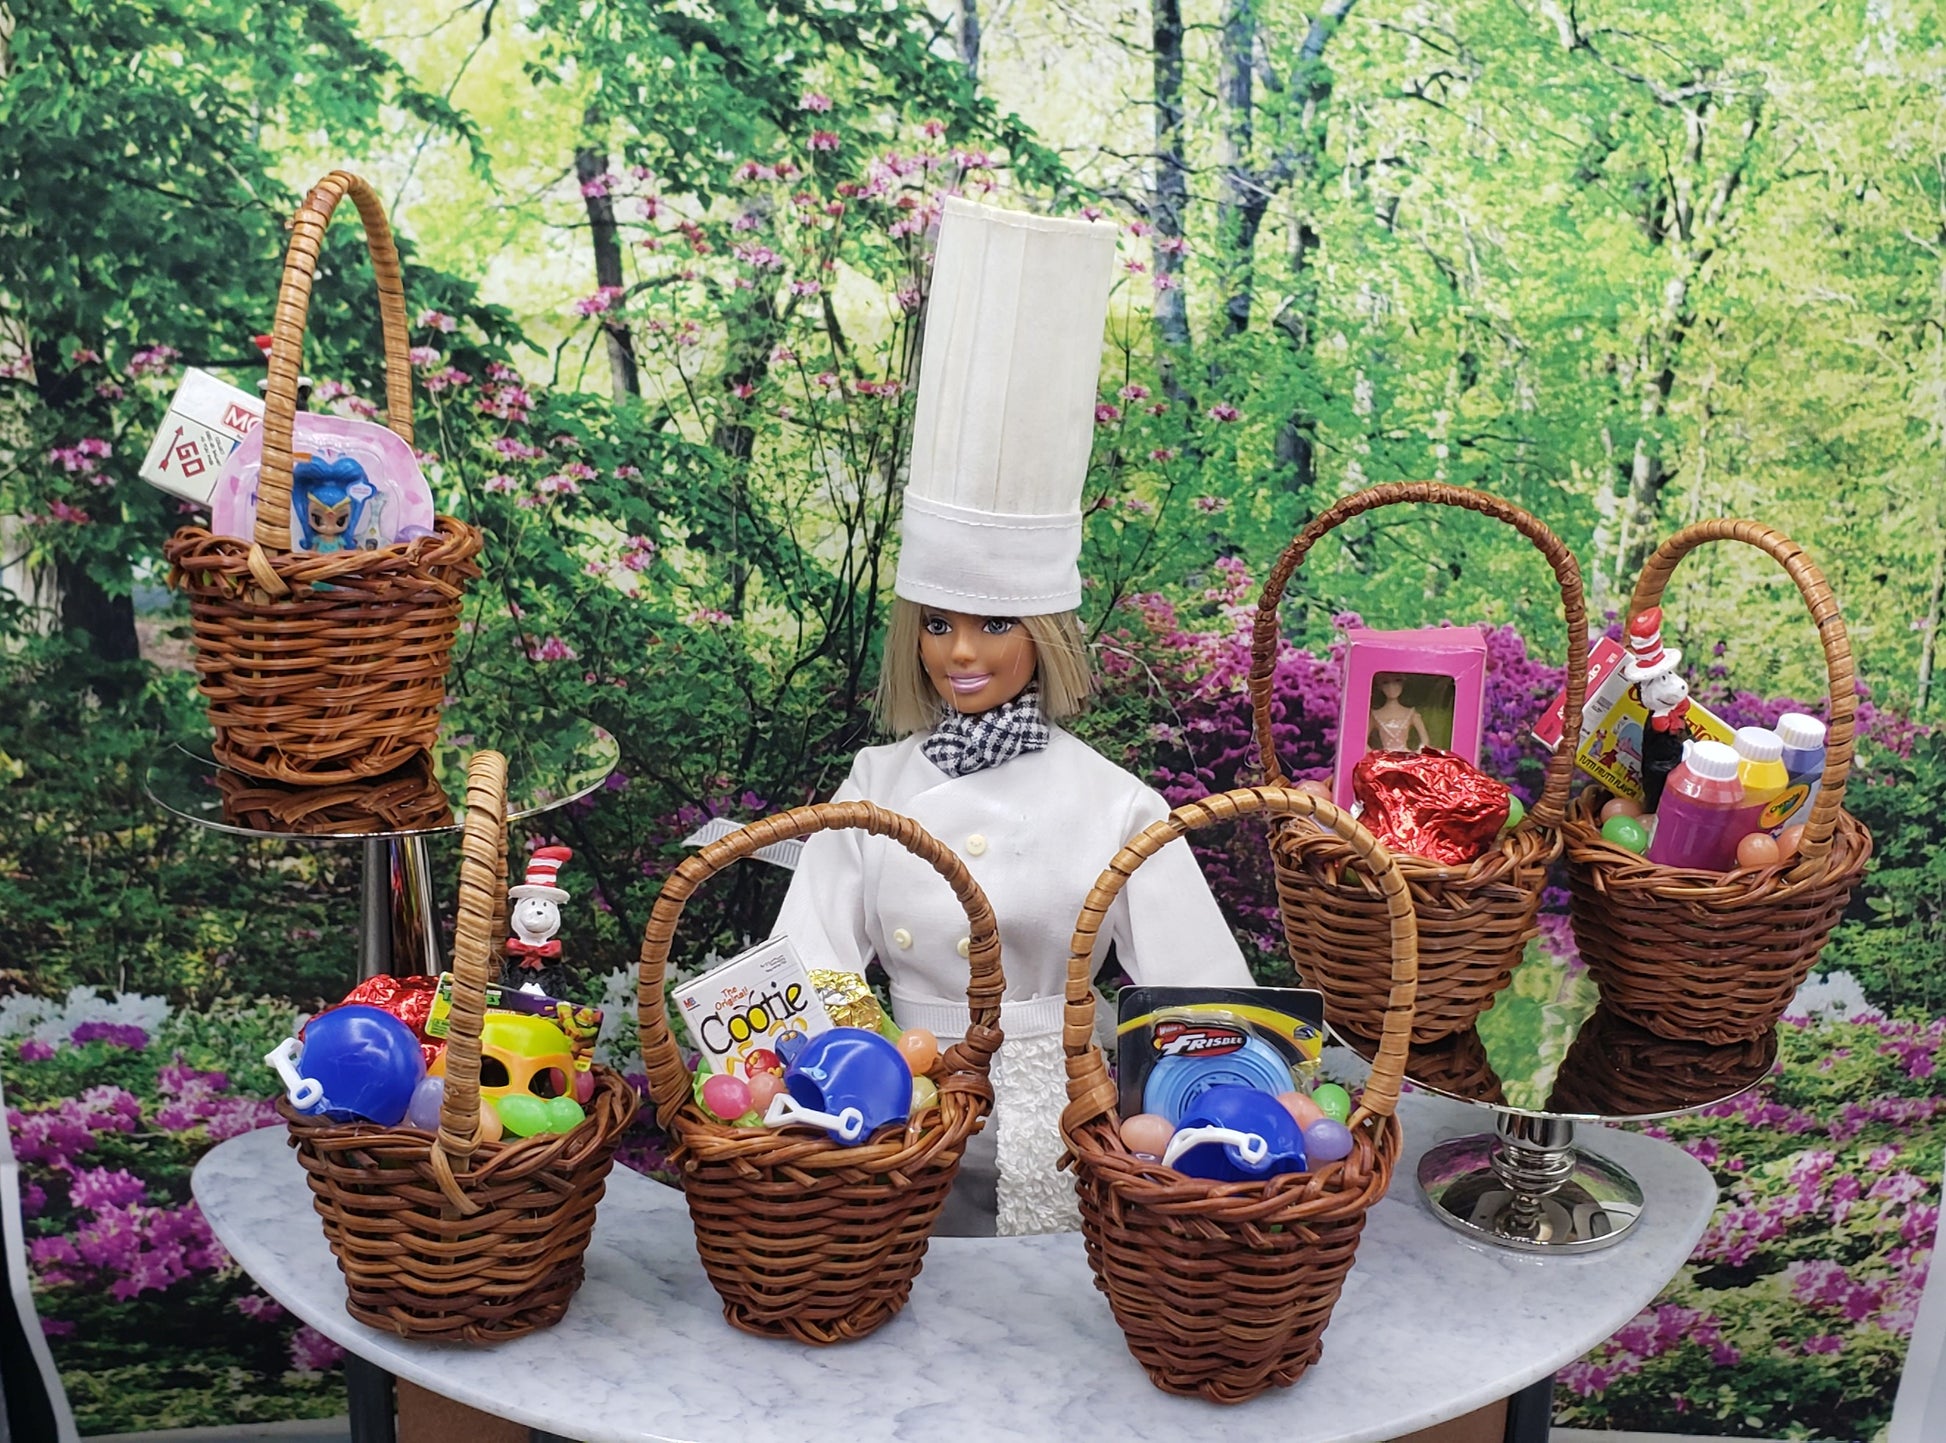 Barbie doll with Easter baskets